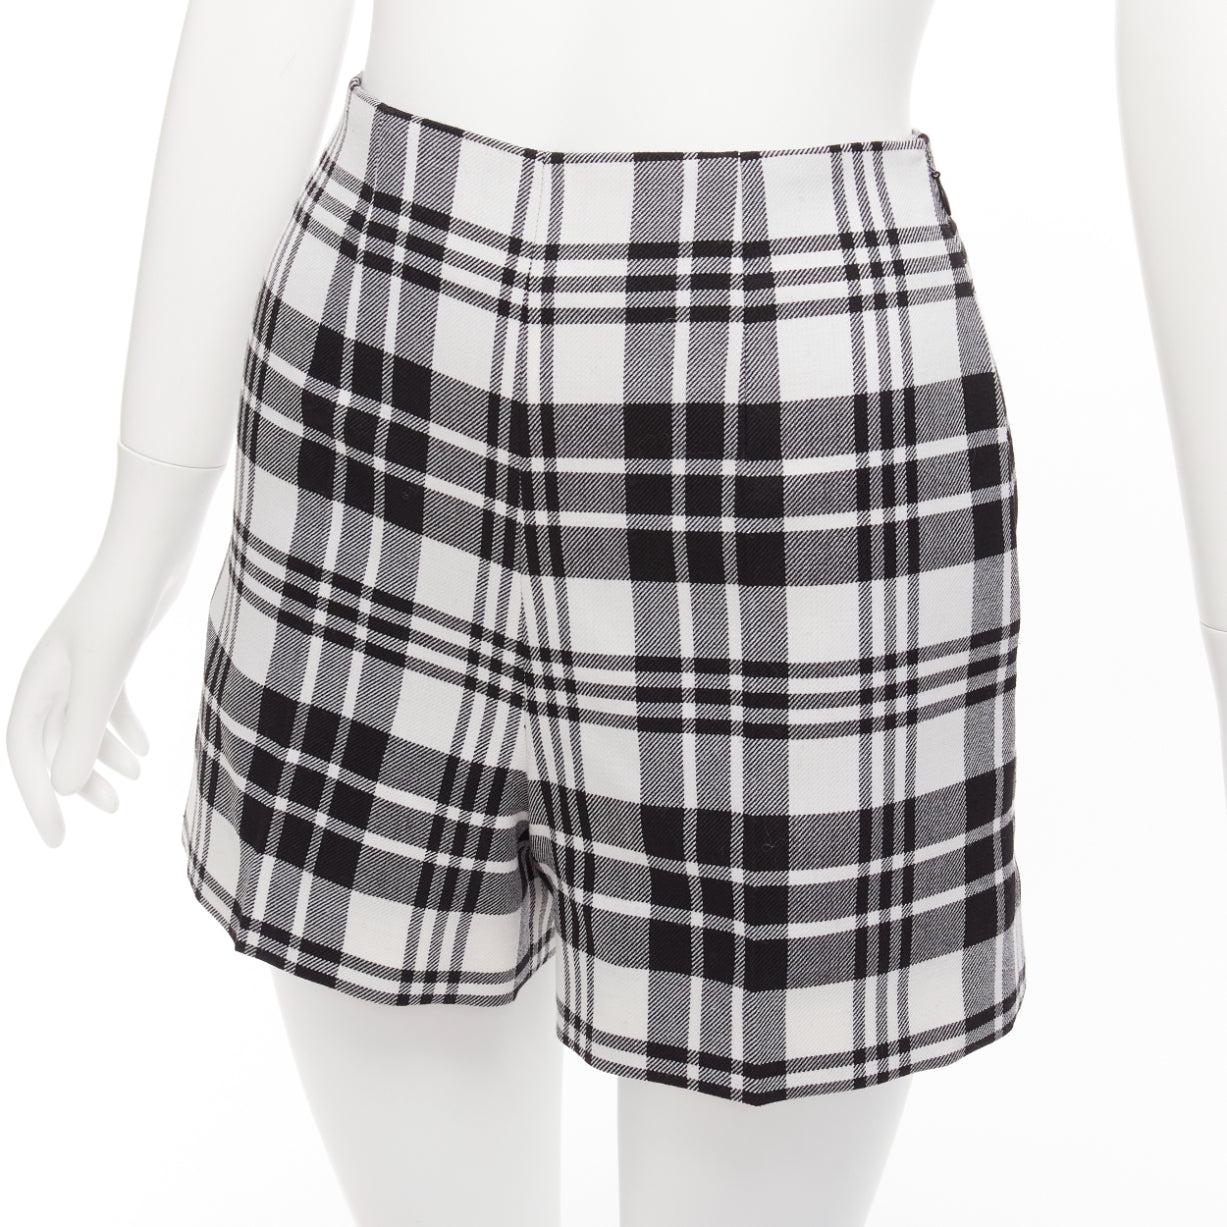 CHRISTIAN DIOR black checked virgin wool high waisted shorts FR32 XXS
Reference: AAWC/A00851
Brand: Dior
Designer: Maria Grazia Chiuri
Material: Virgin Wool
Color: Black, White
Pattern: Checkered
Closure: Zip
Lining: Black Fabric
Extra Details: Side